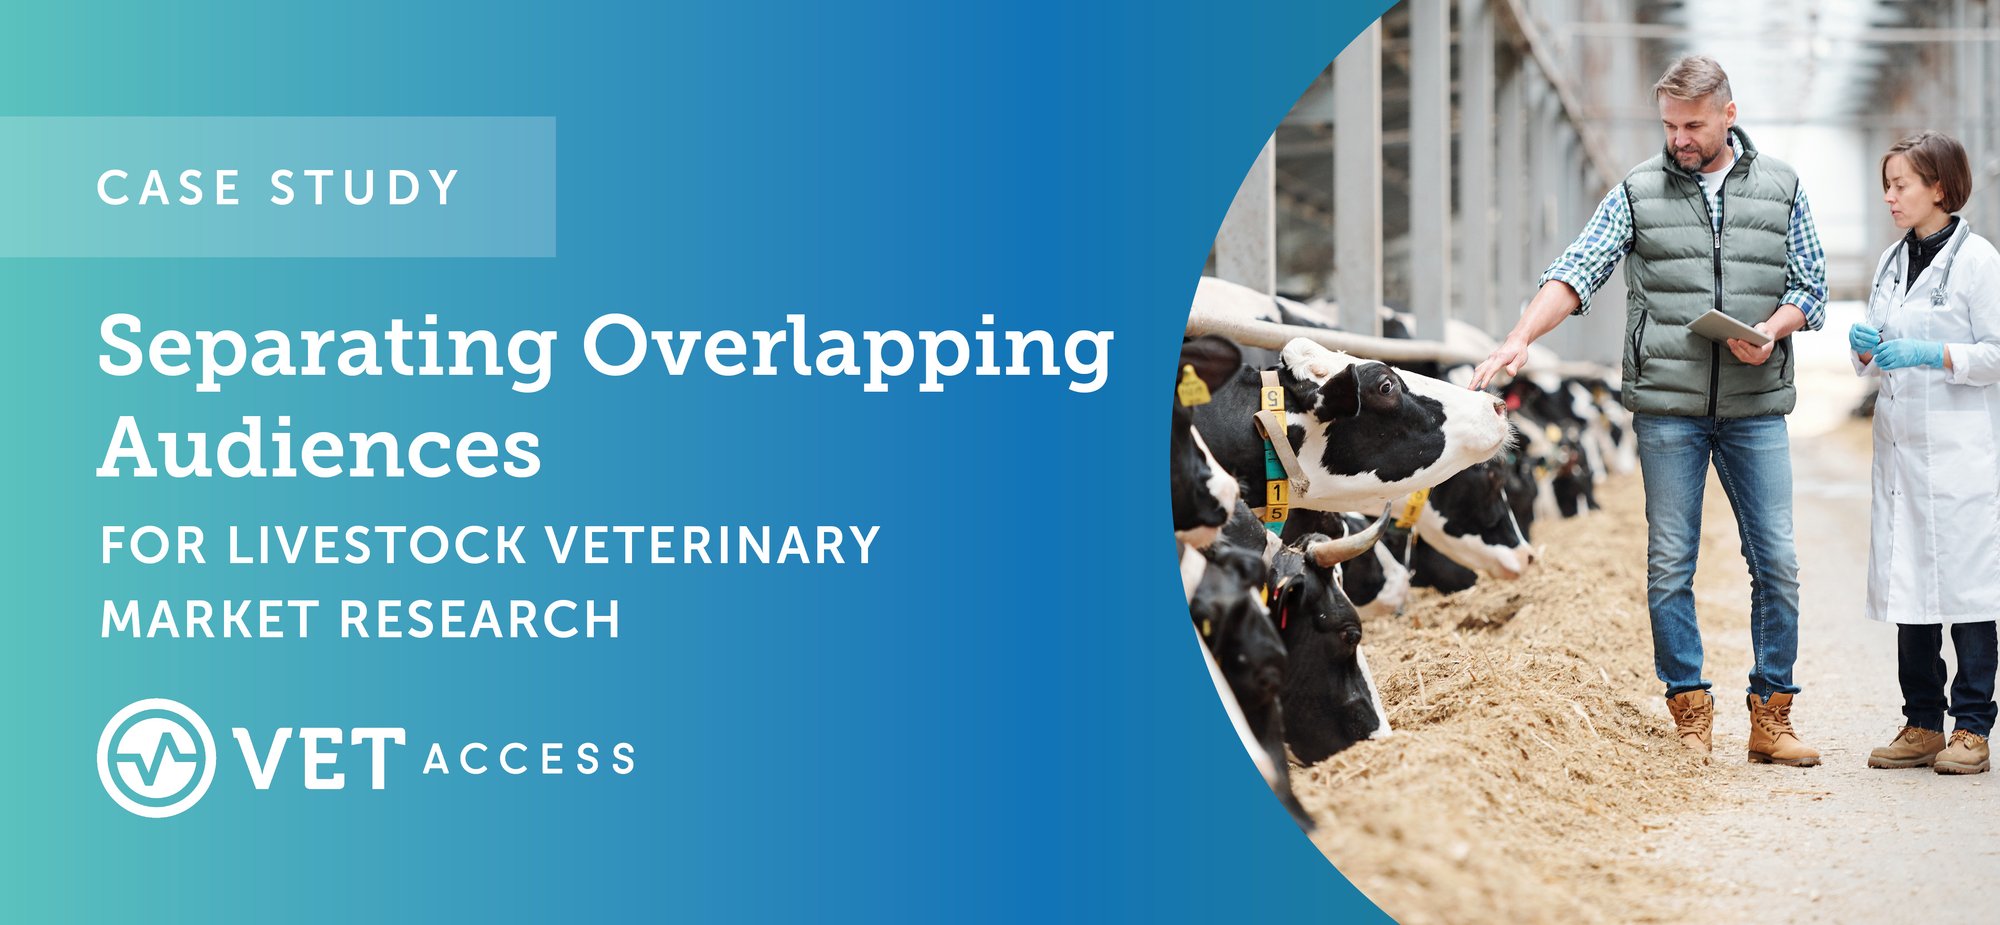 Case Study Separating Overlapping Audiences For Livestock Veterinary Market Research